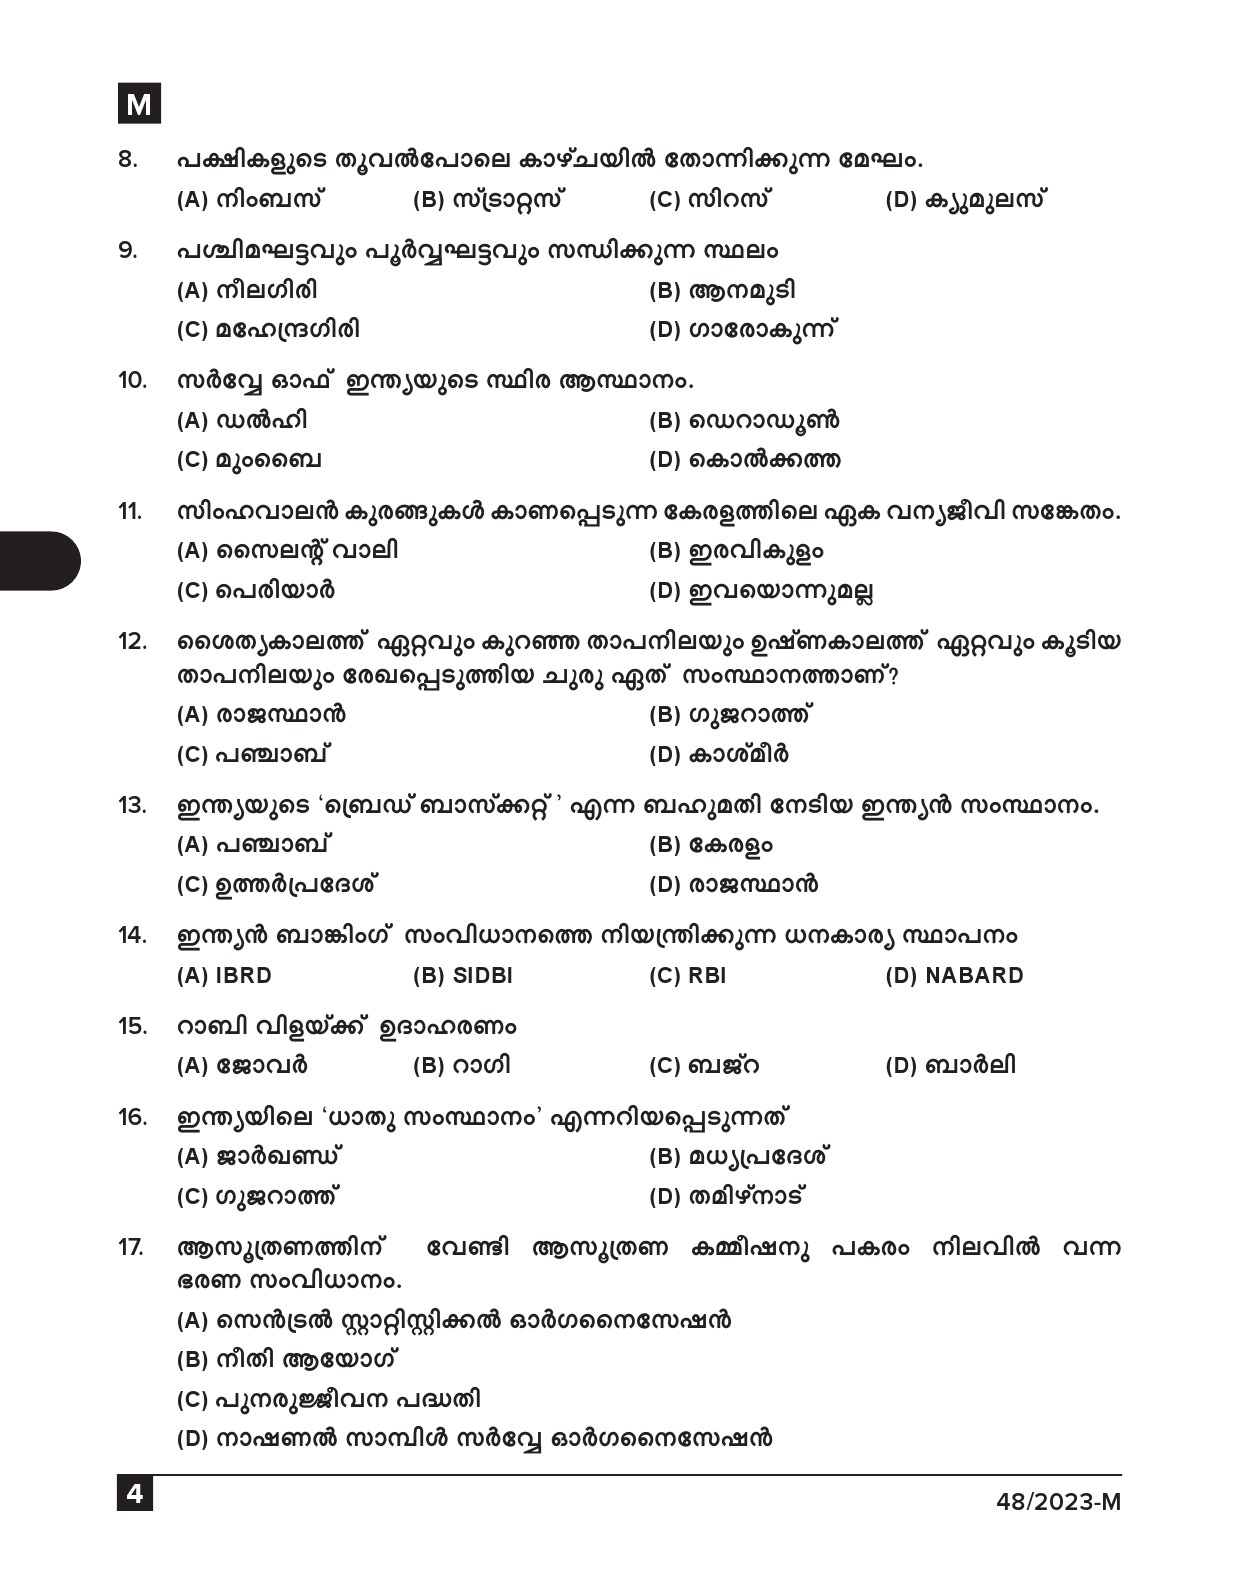 KPSC Fire and Rescue Officer Malayalam Exam 2023 Code 0482023 M 3